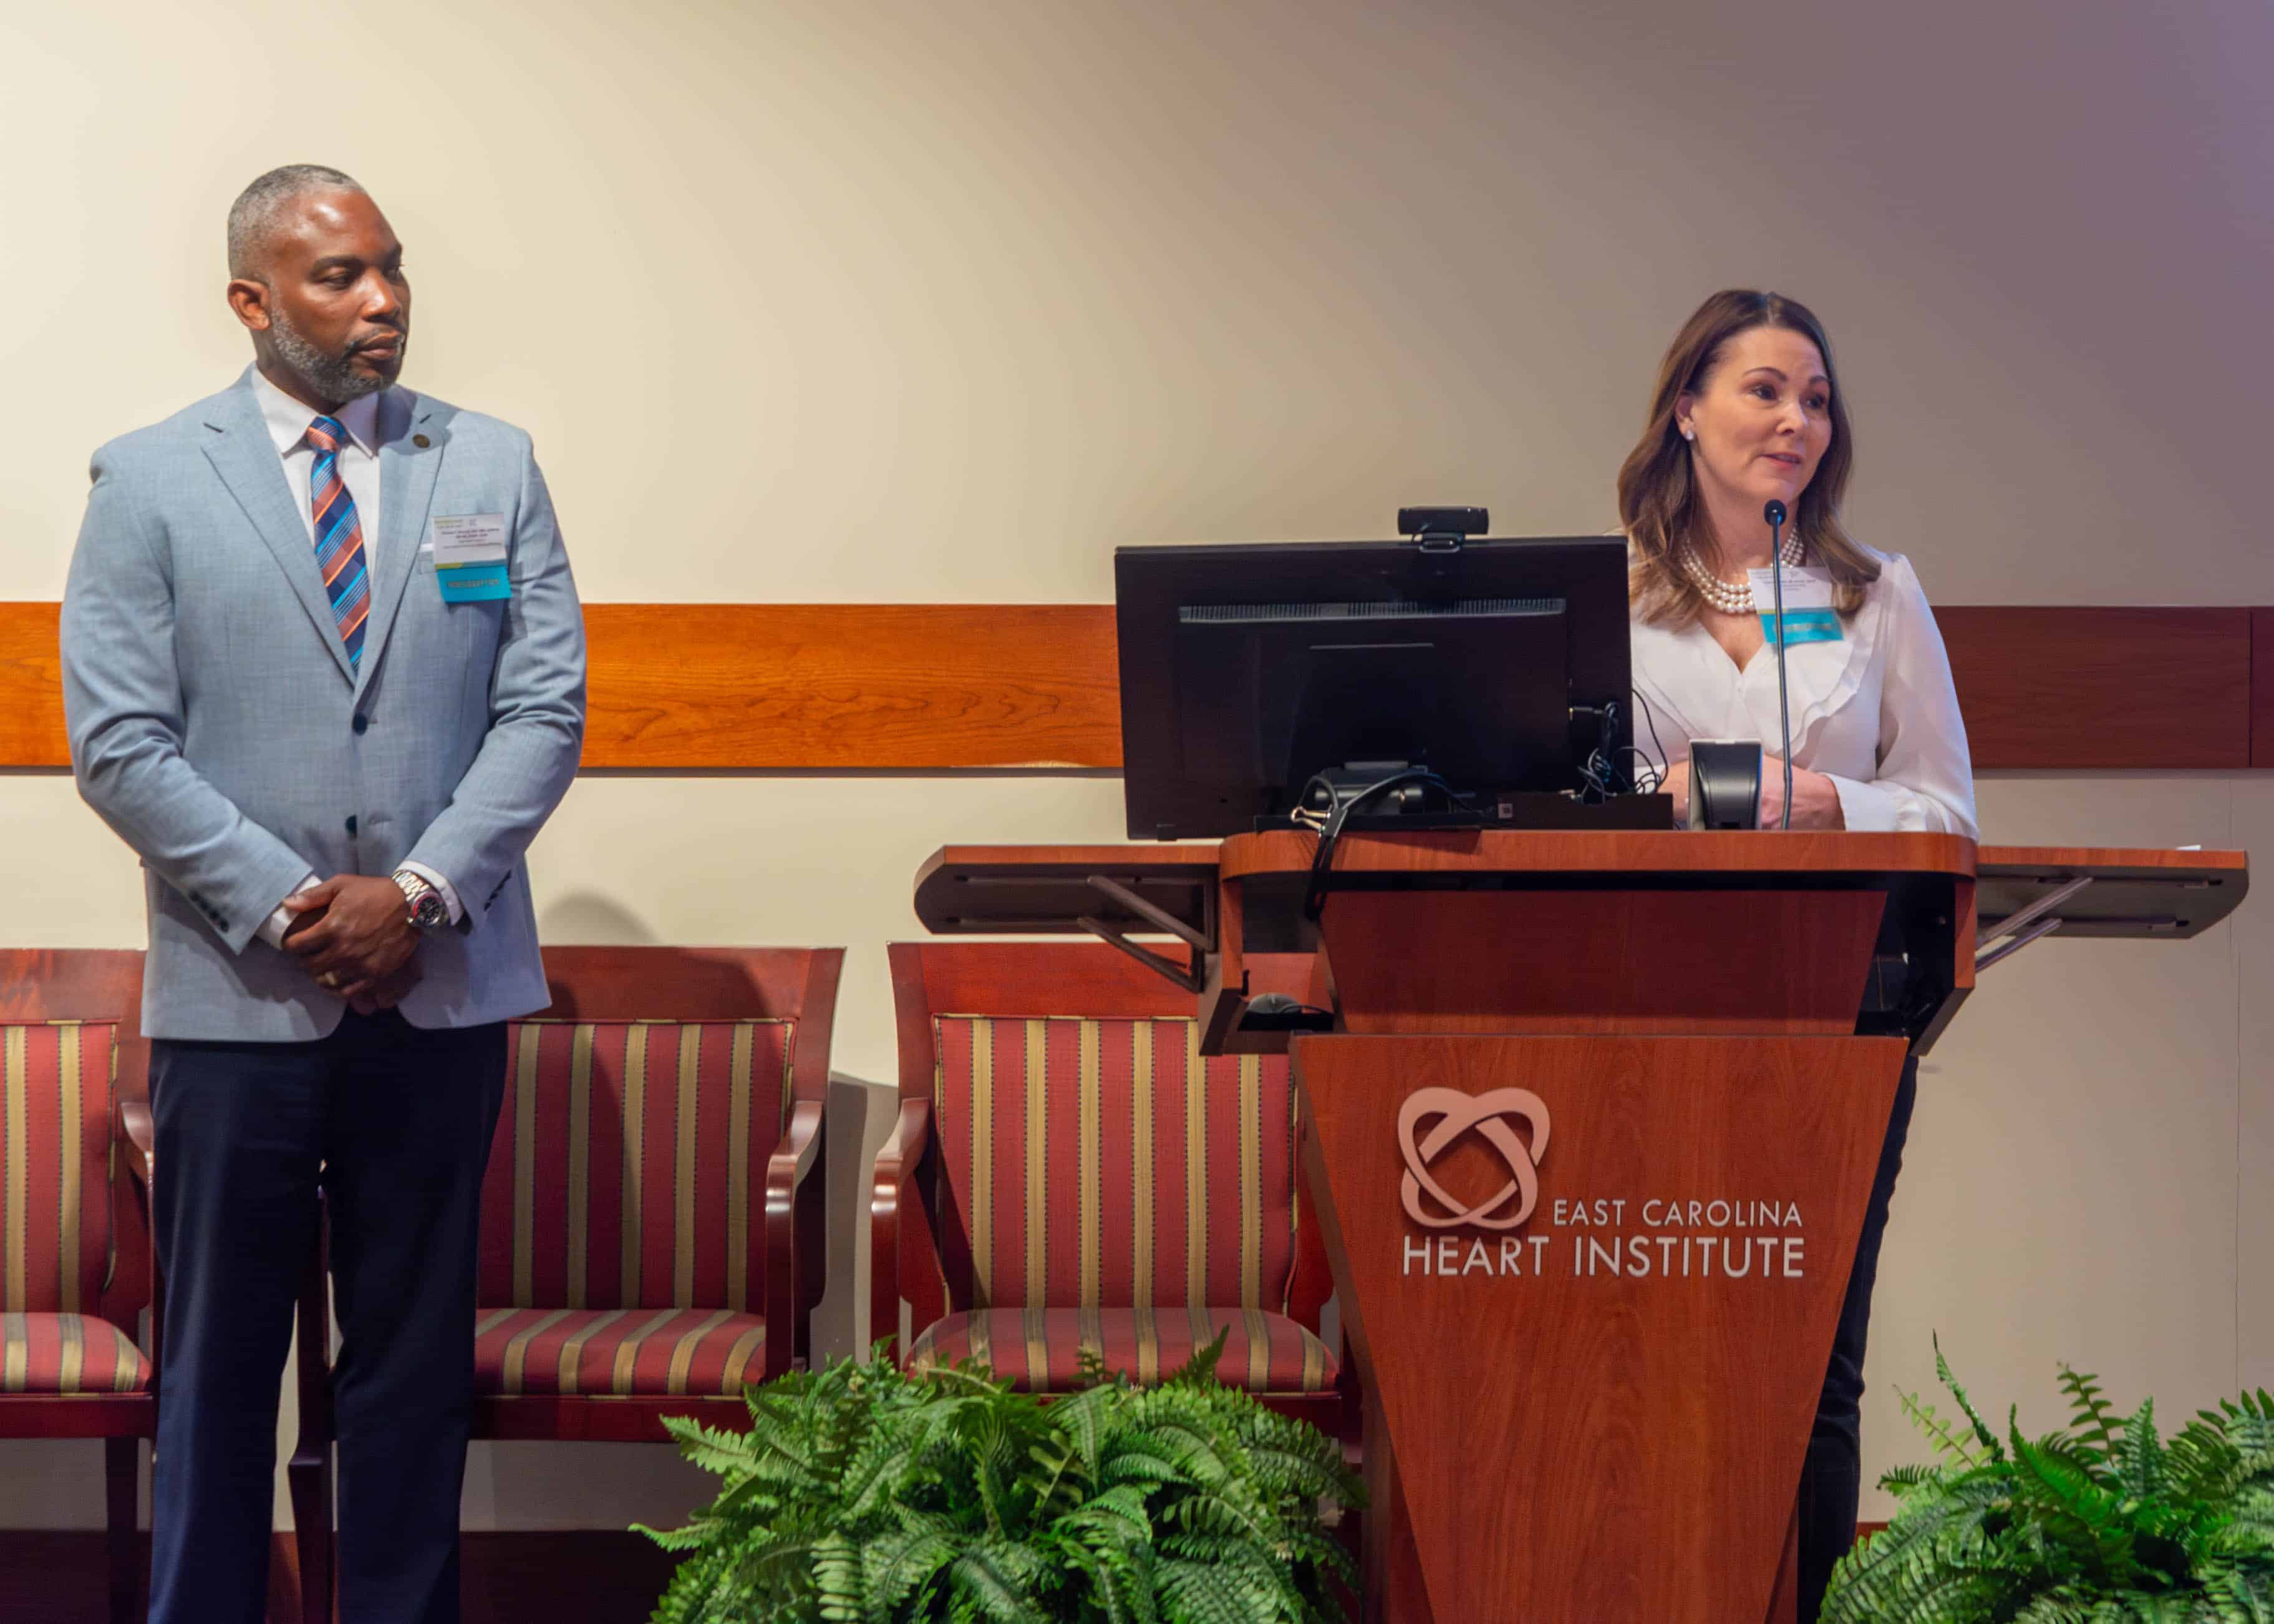 Nurse Research Day in Eastern North Carolina fosters collaboration for innovative healthcare solutions.